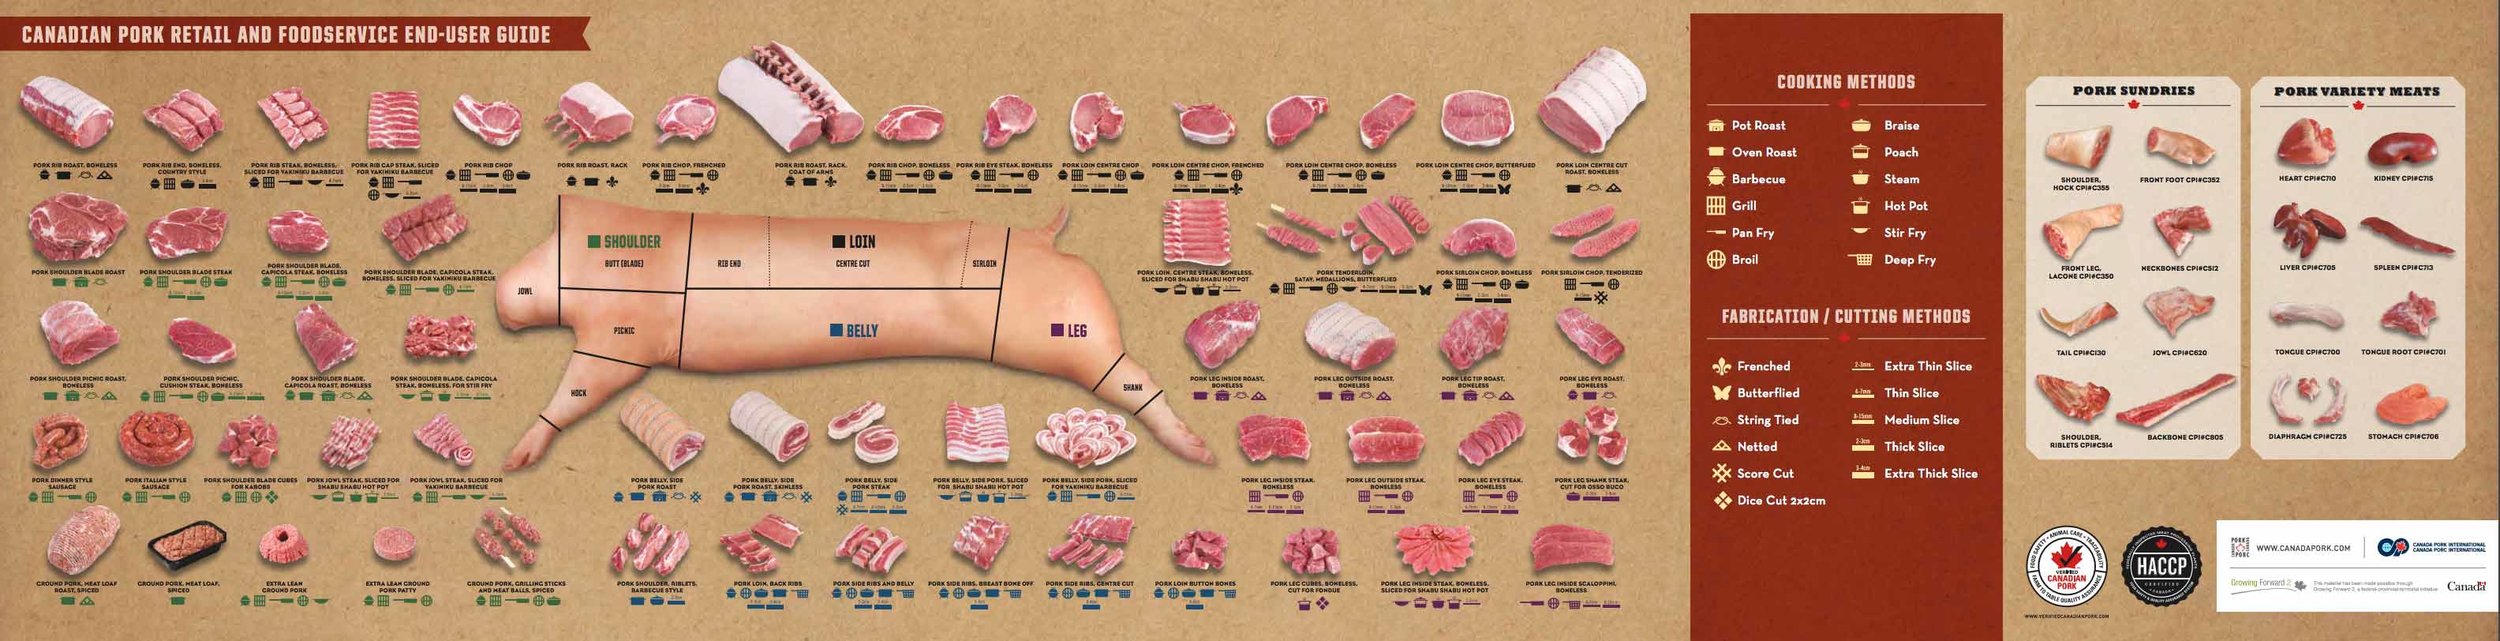 Canadian Pork Buyers Guide